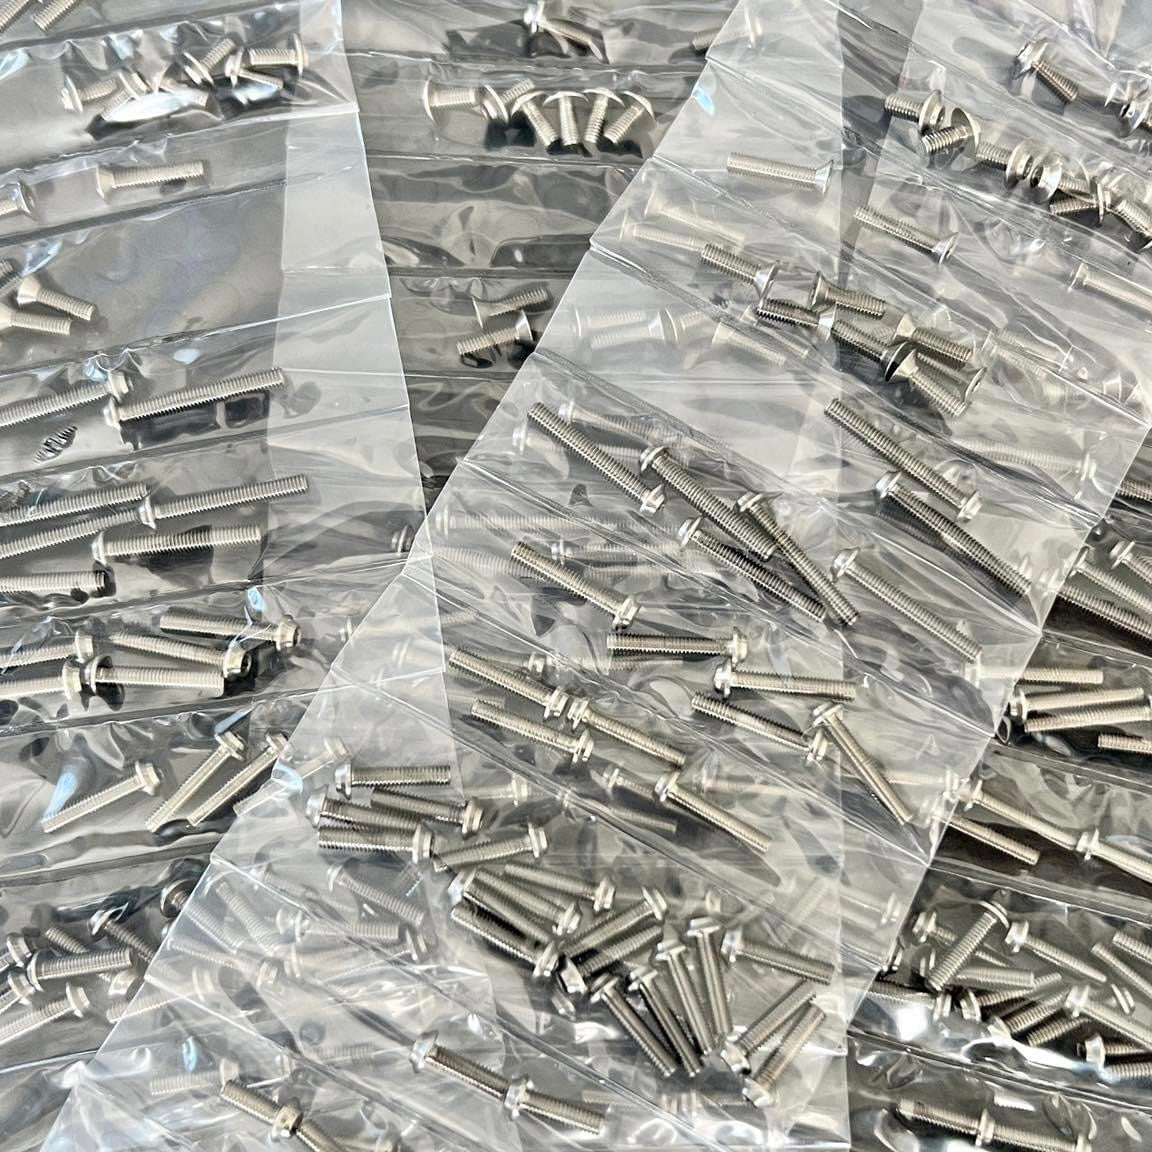 New Complete Screw Sets Available